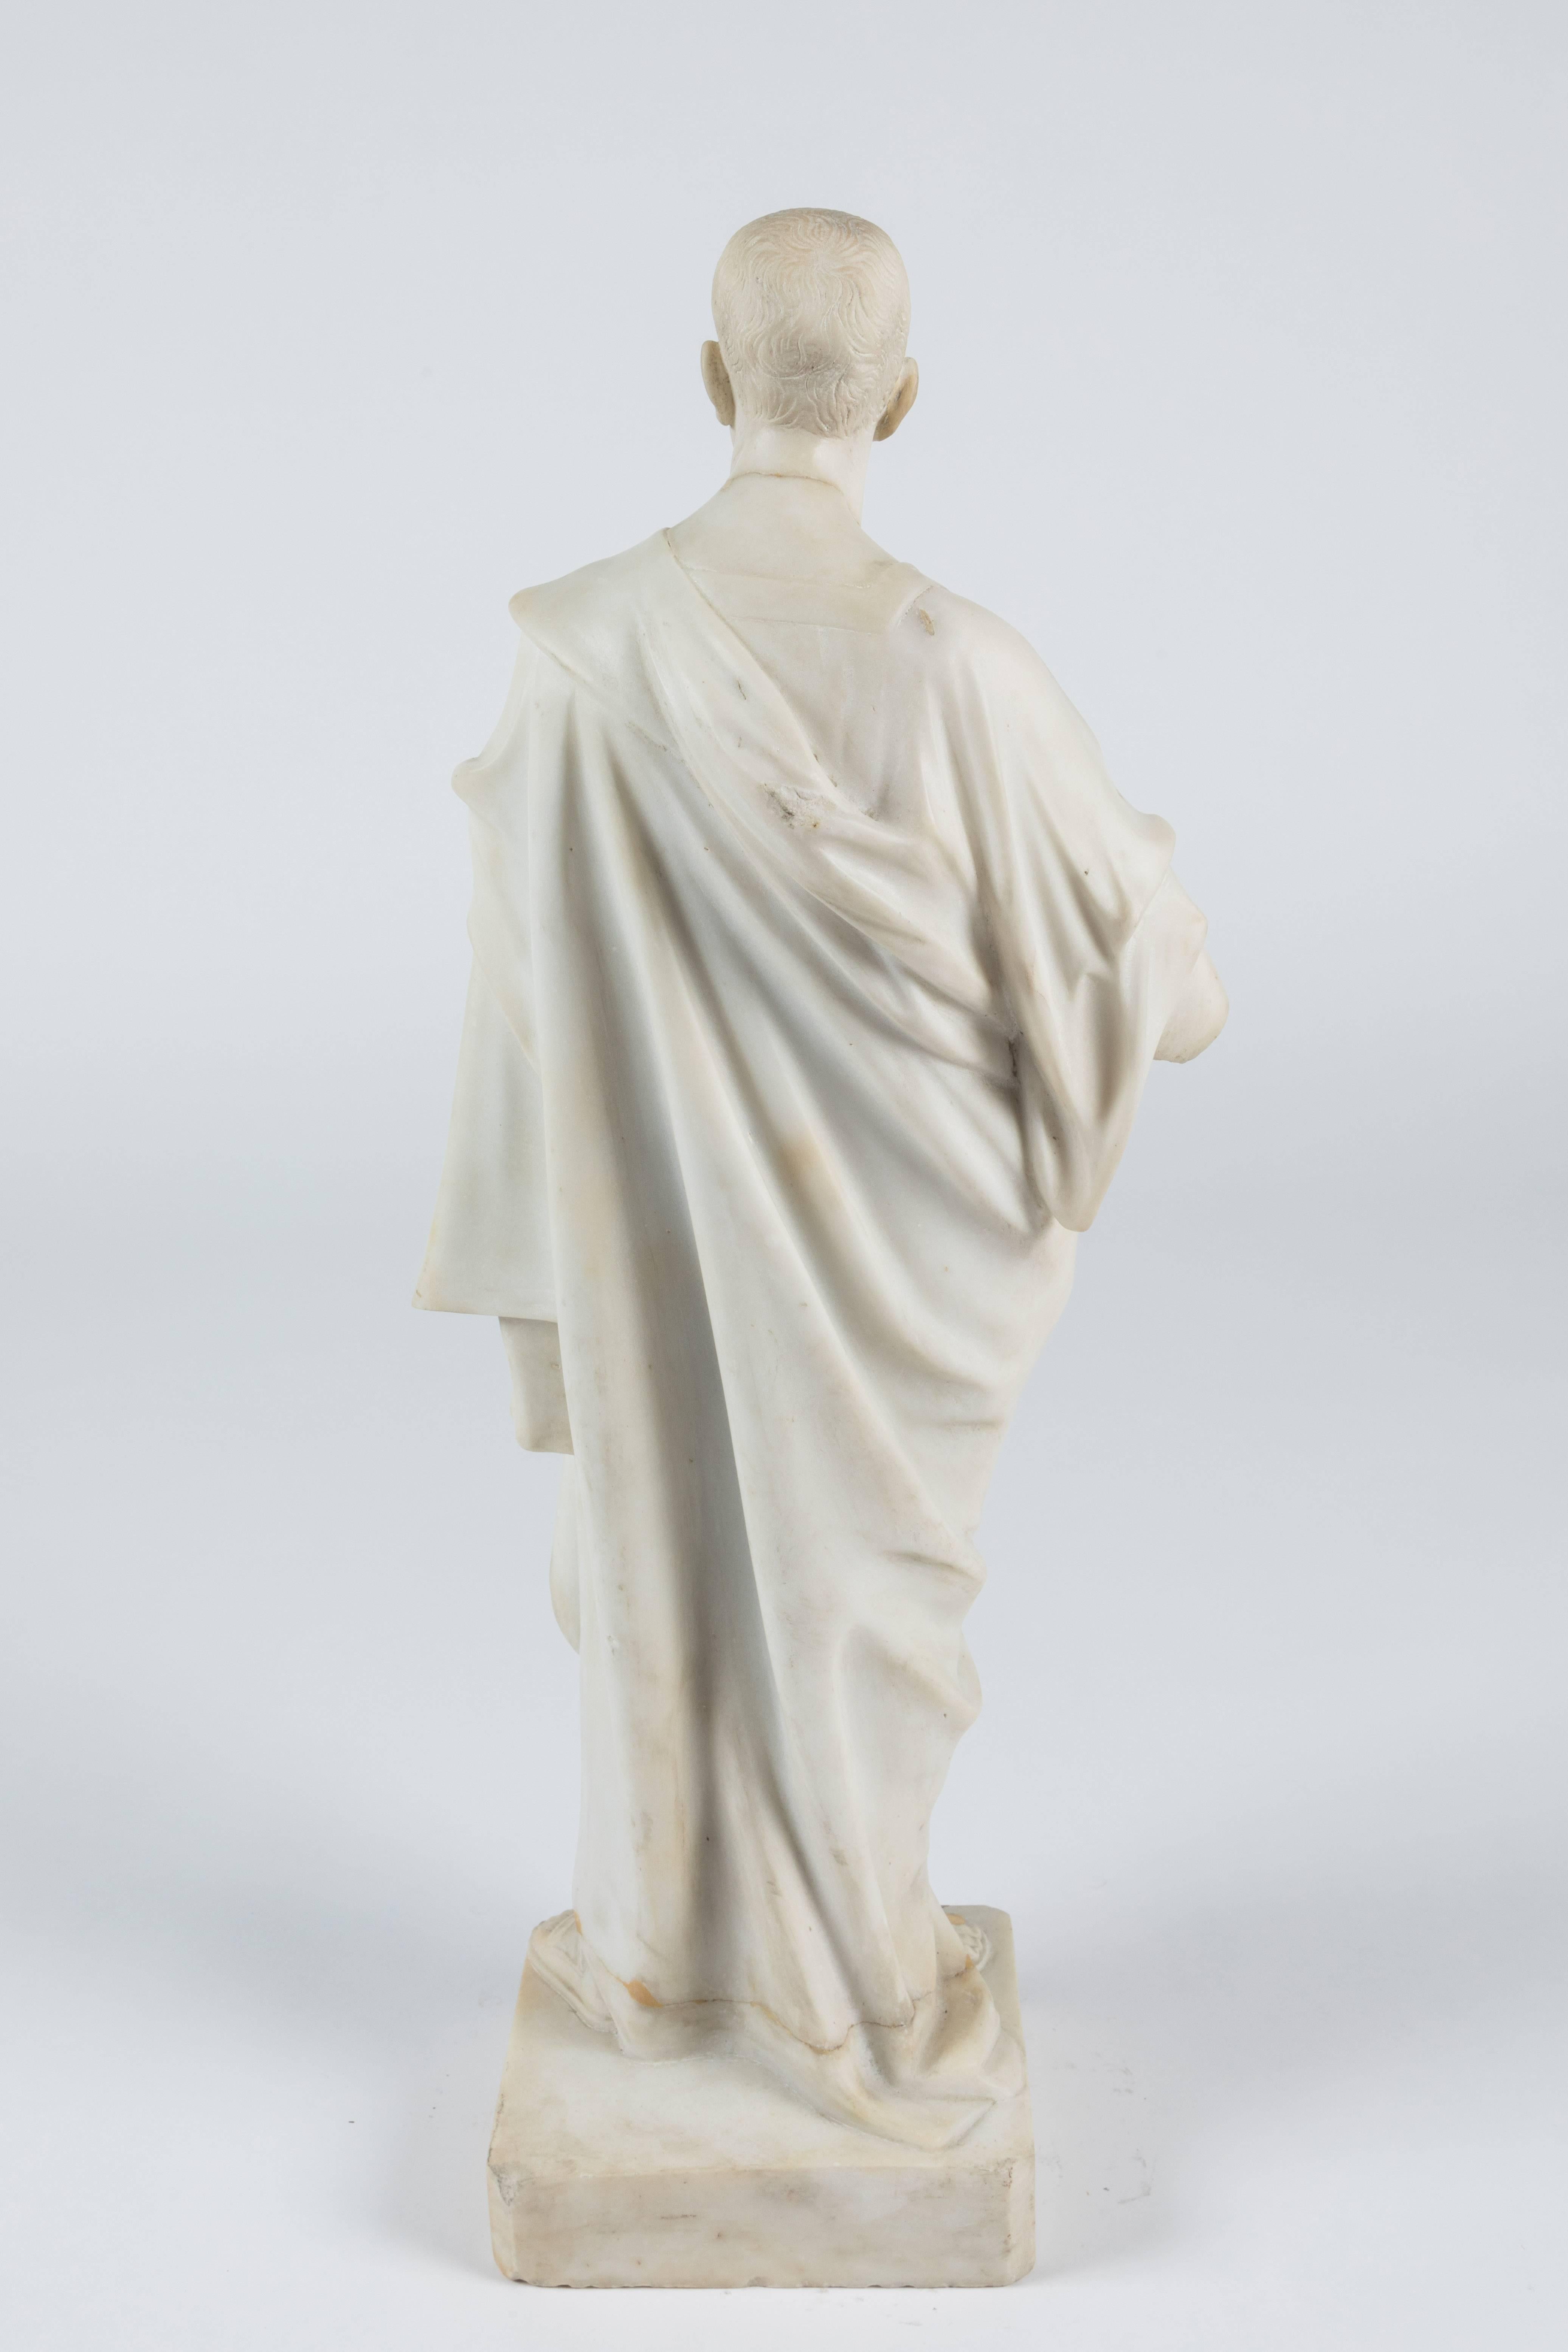 Hand-Carved Marble Statue of a Robed Roman Figure